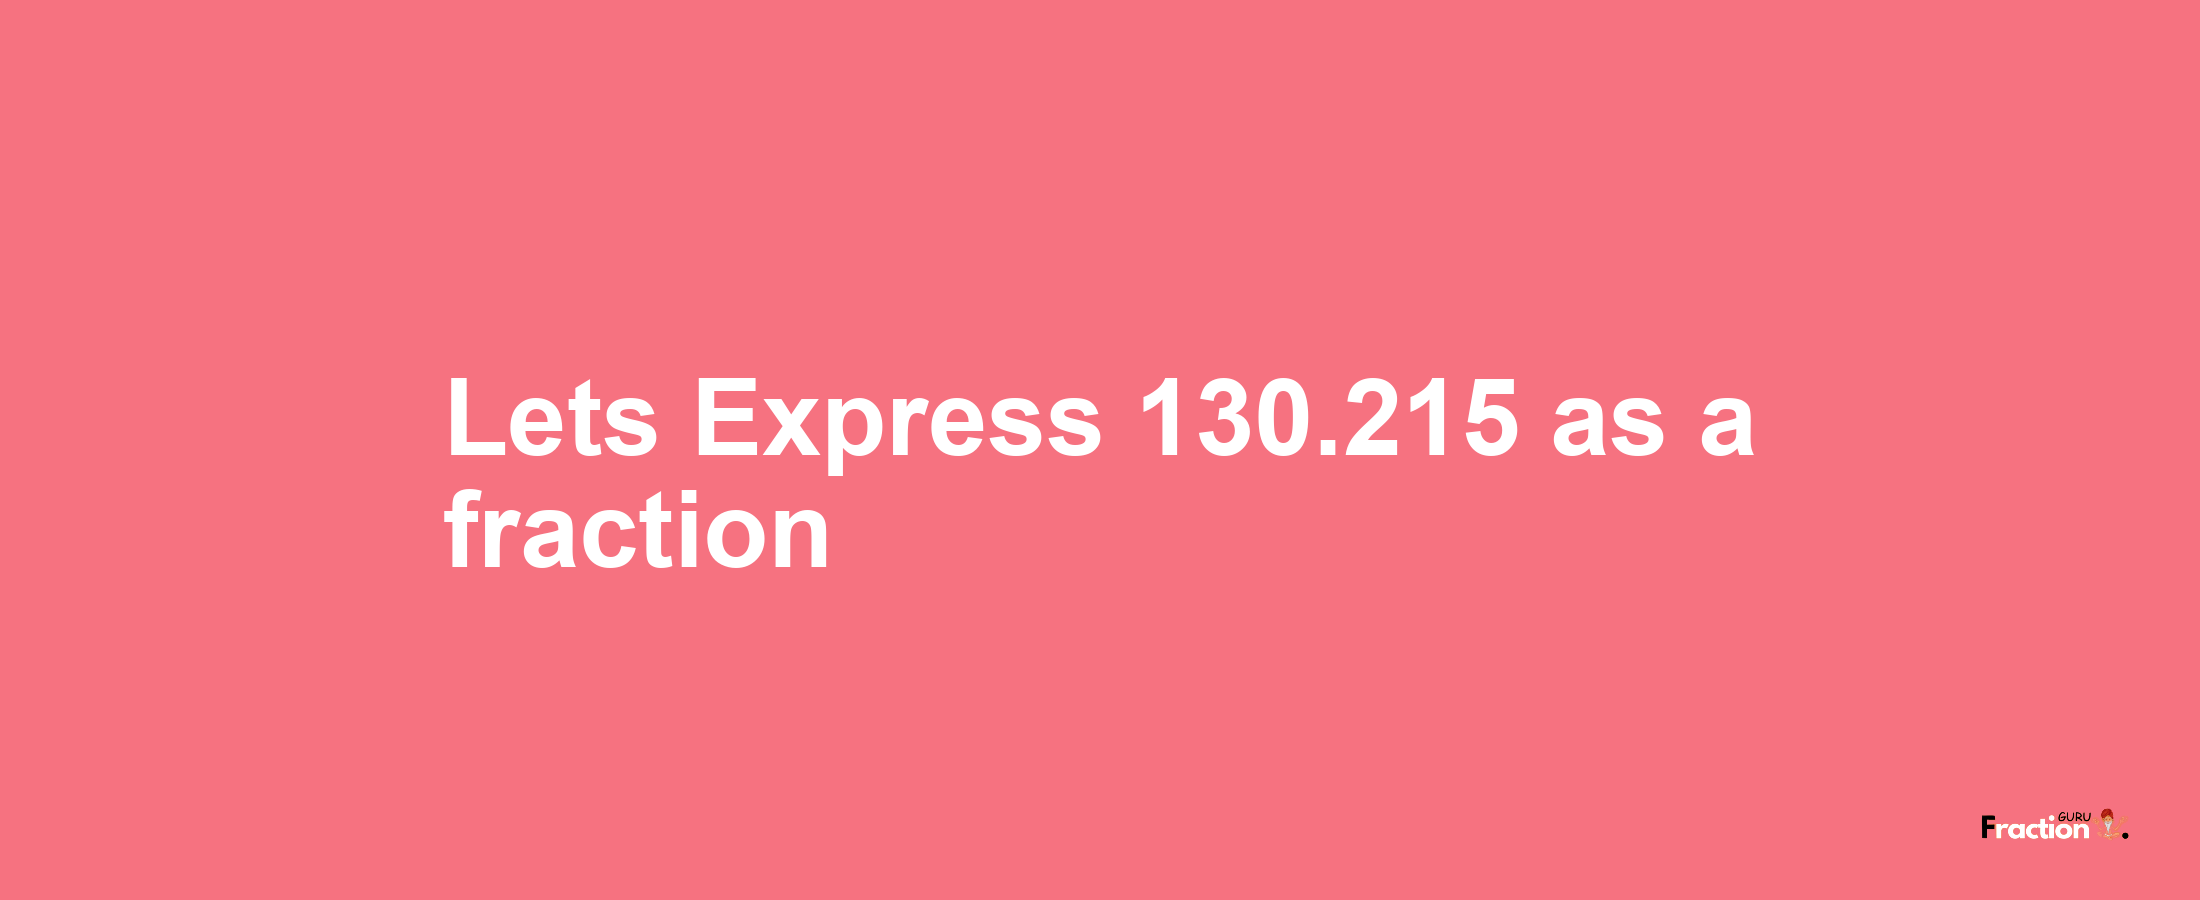 Lets Express 130.215 as afraction